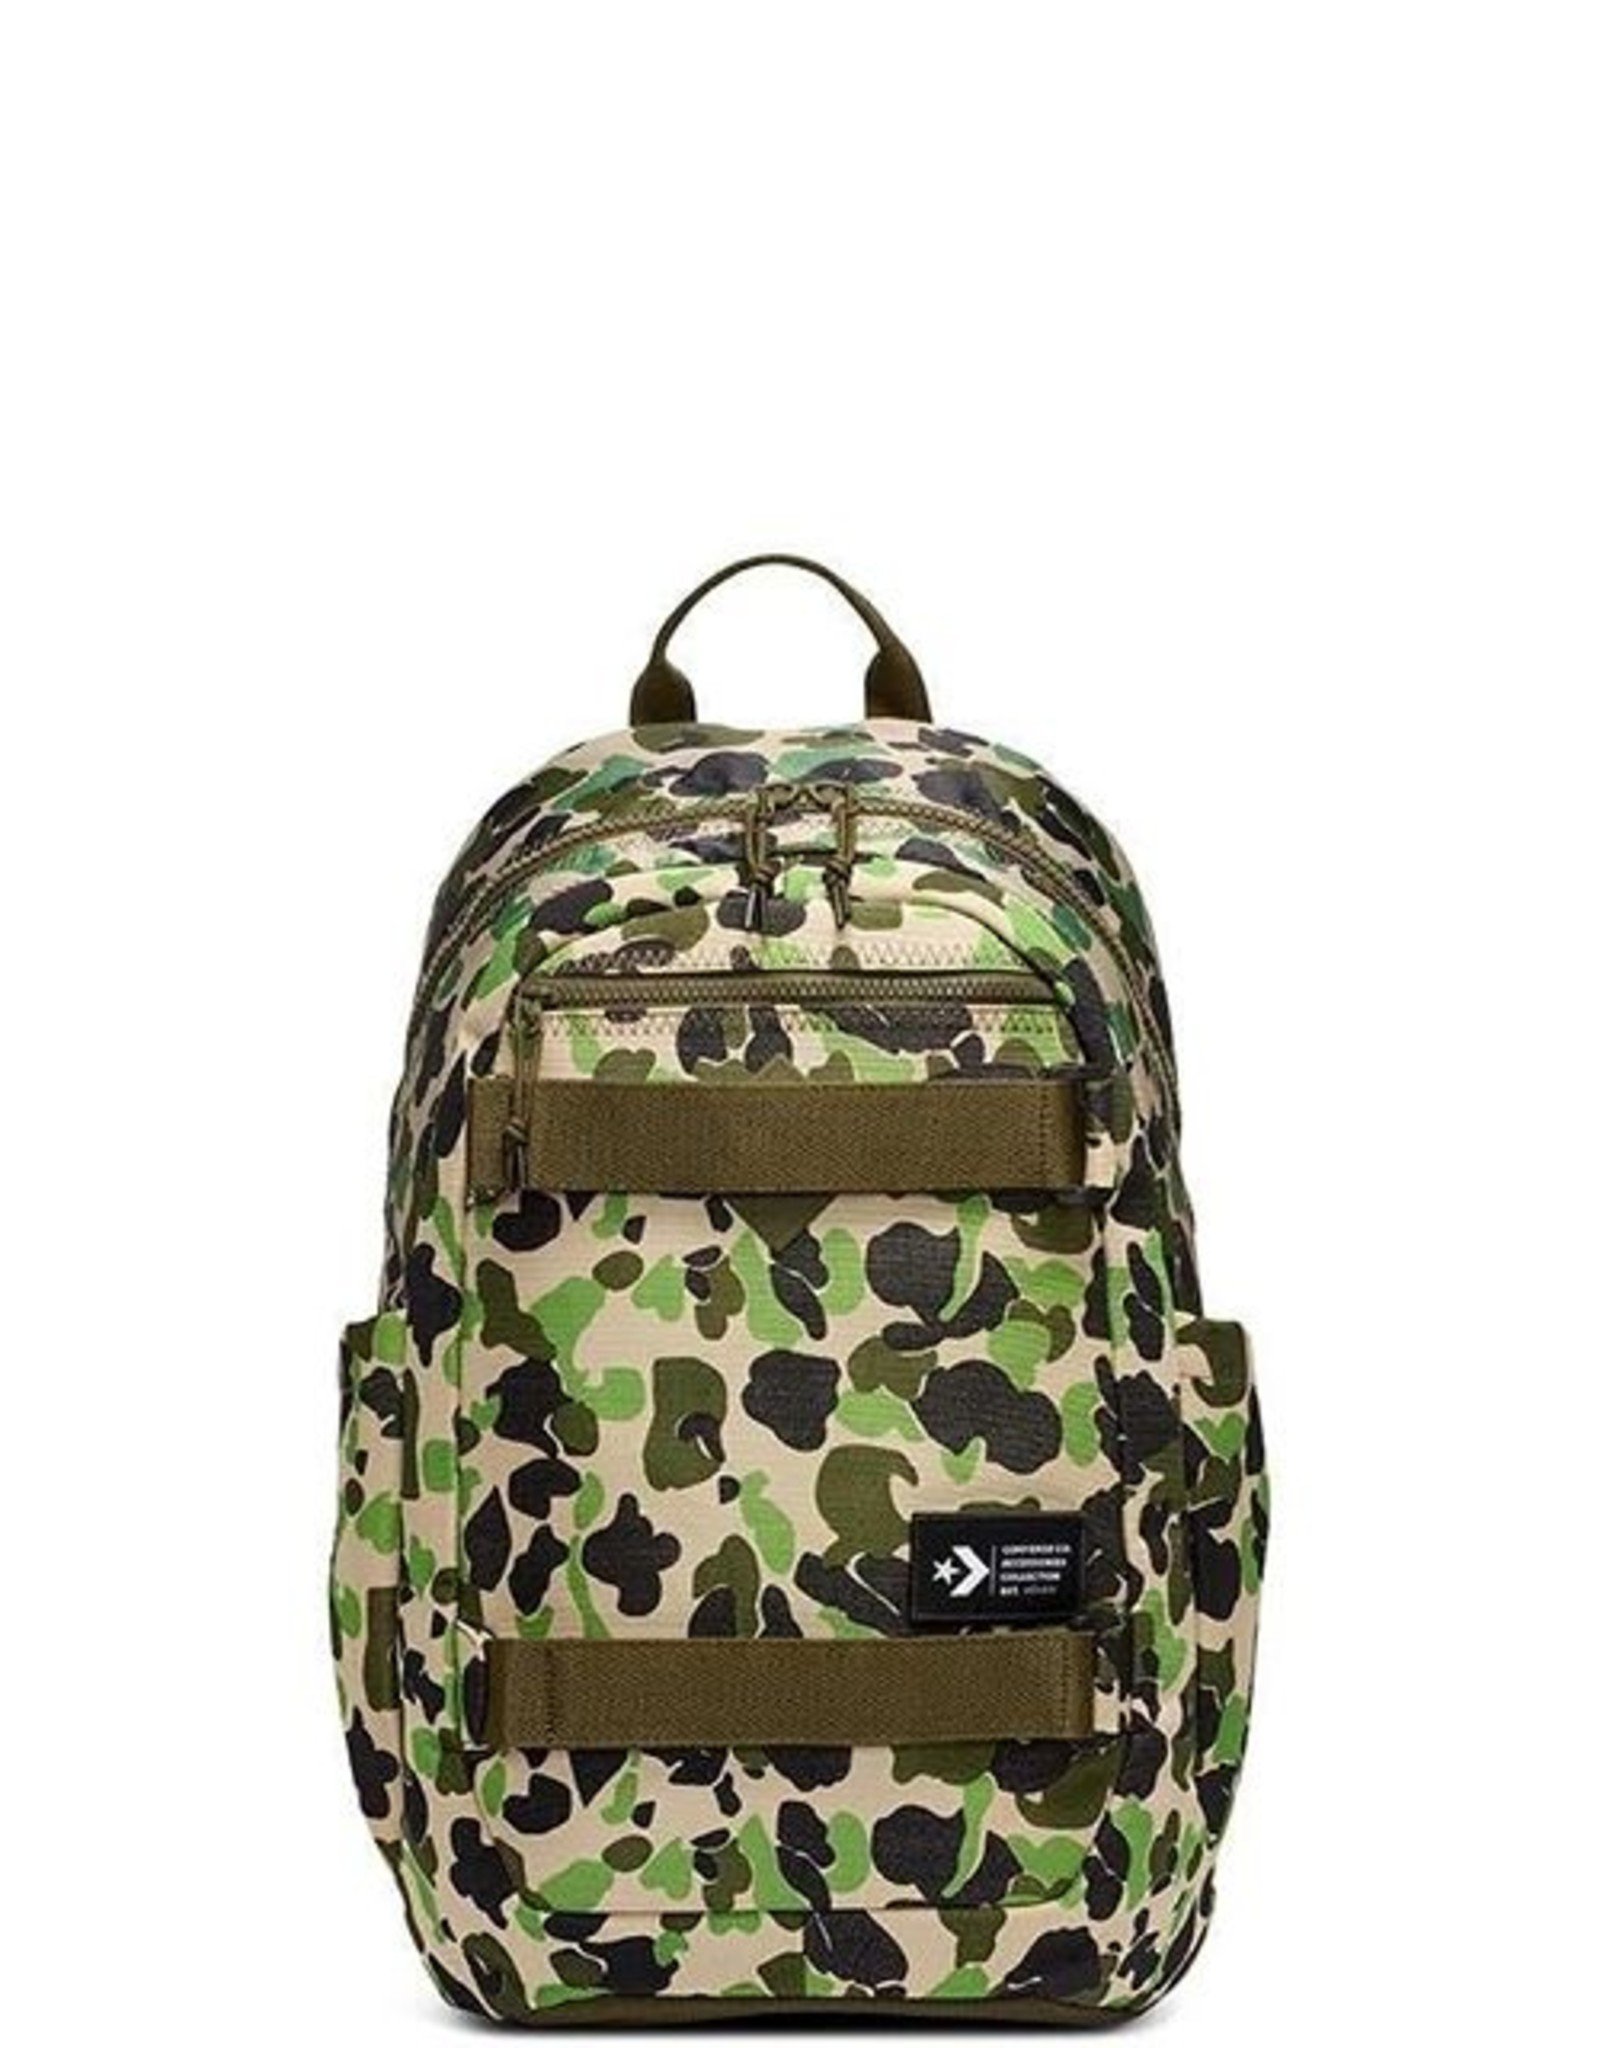 converse military backpack